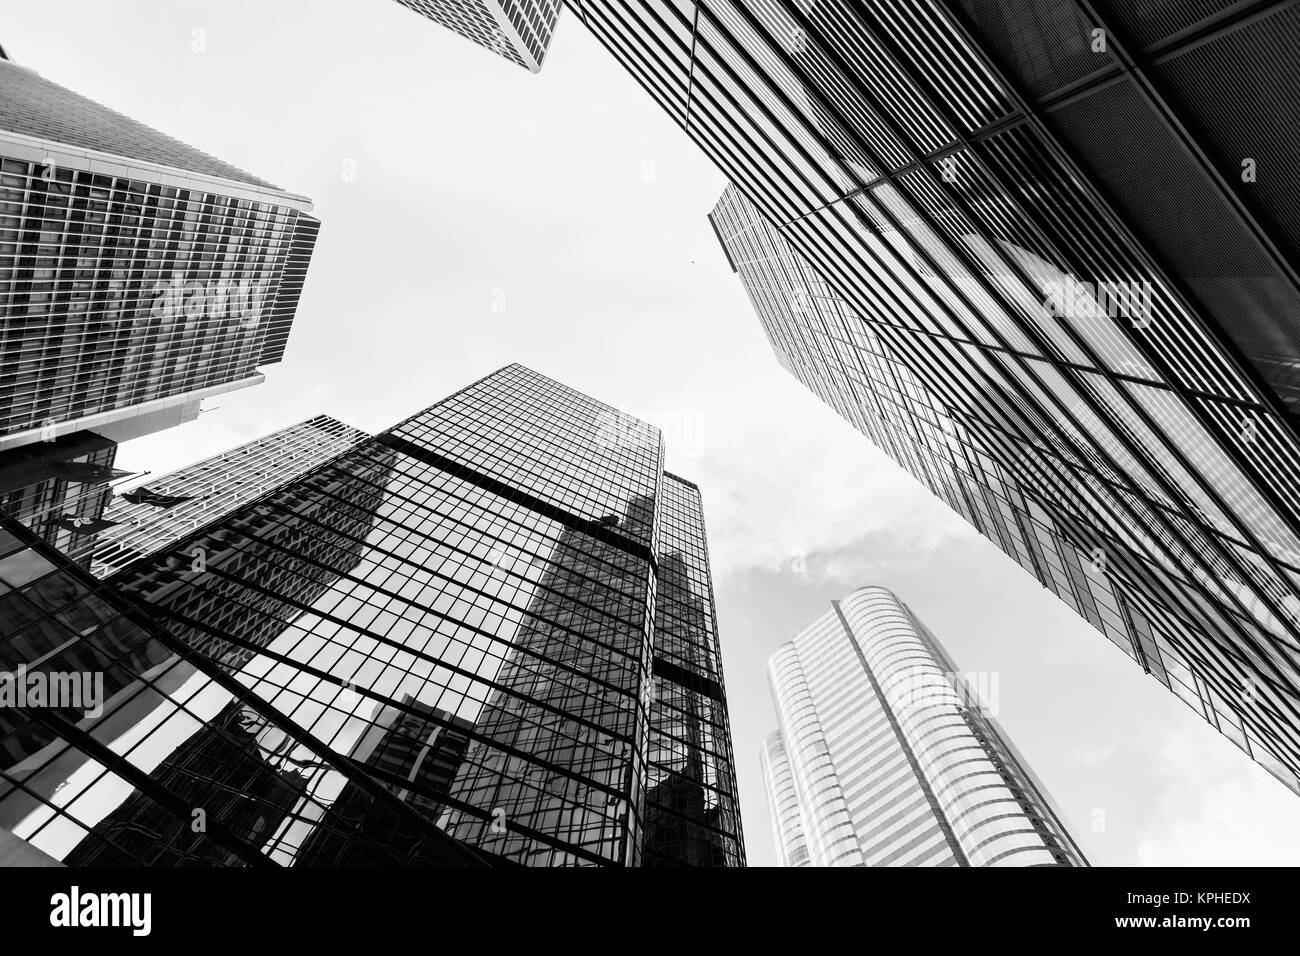 Urban skyline with skyscrapers. High-rise office buildings in city of Hong Kong. Black and white photo Stock Photo